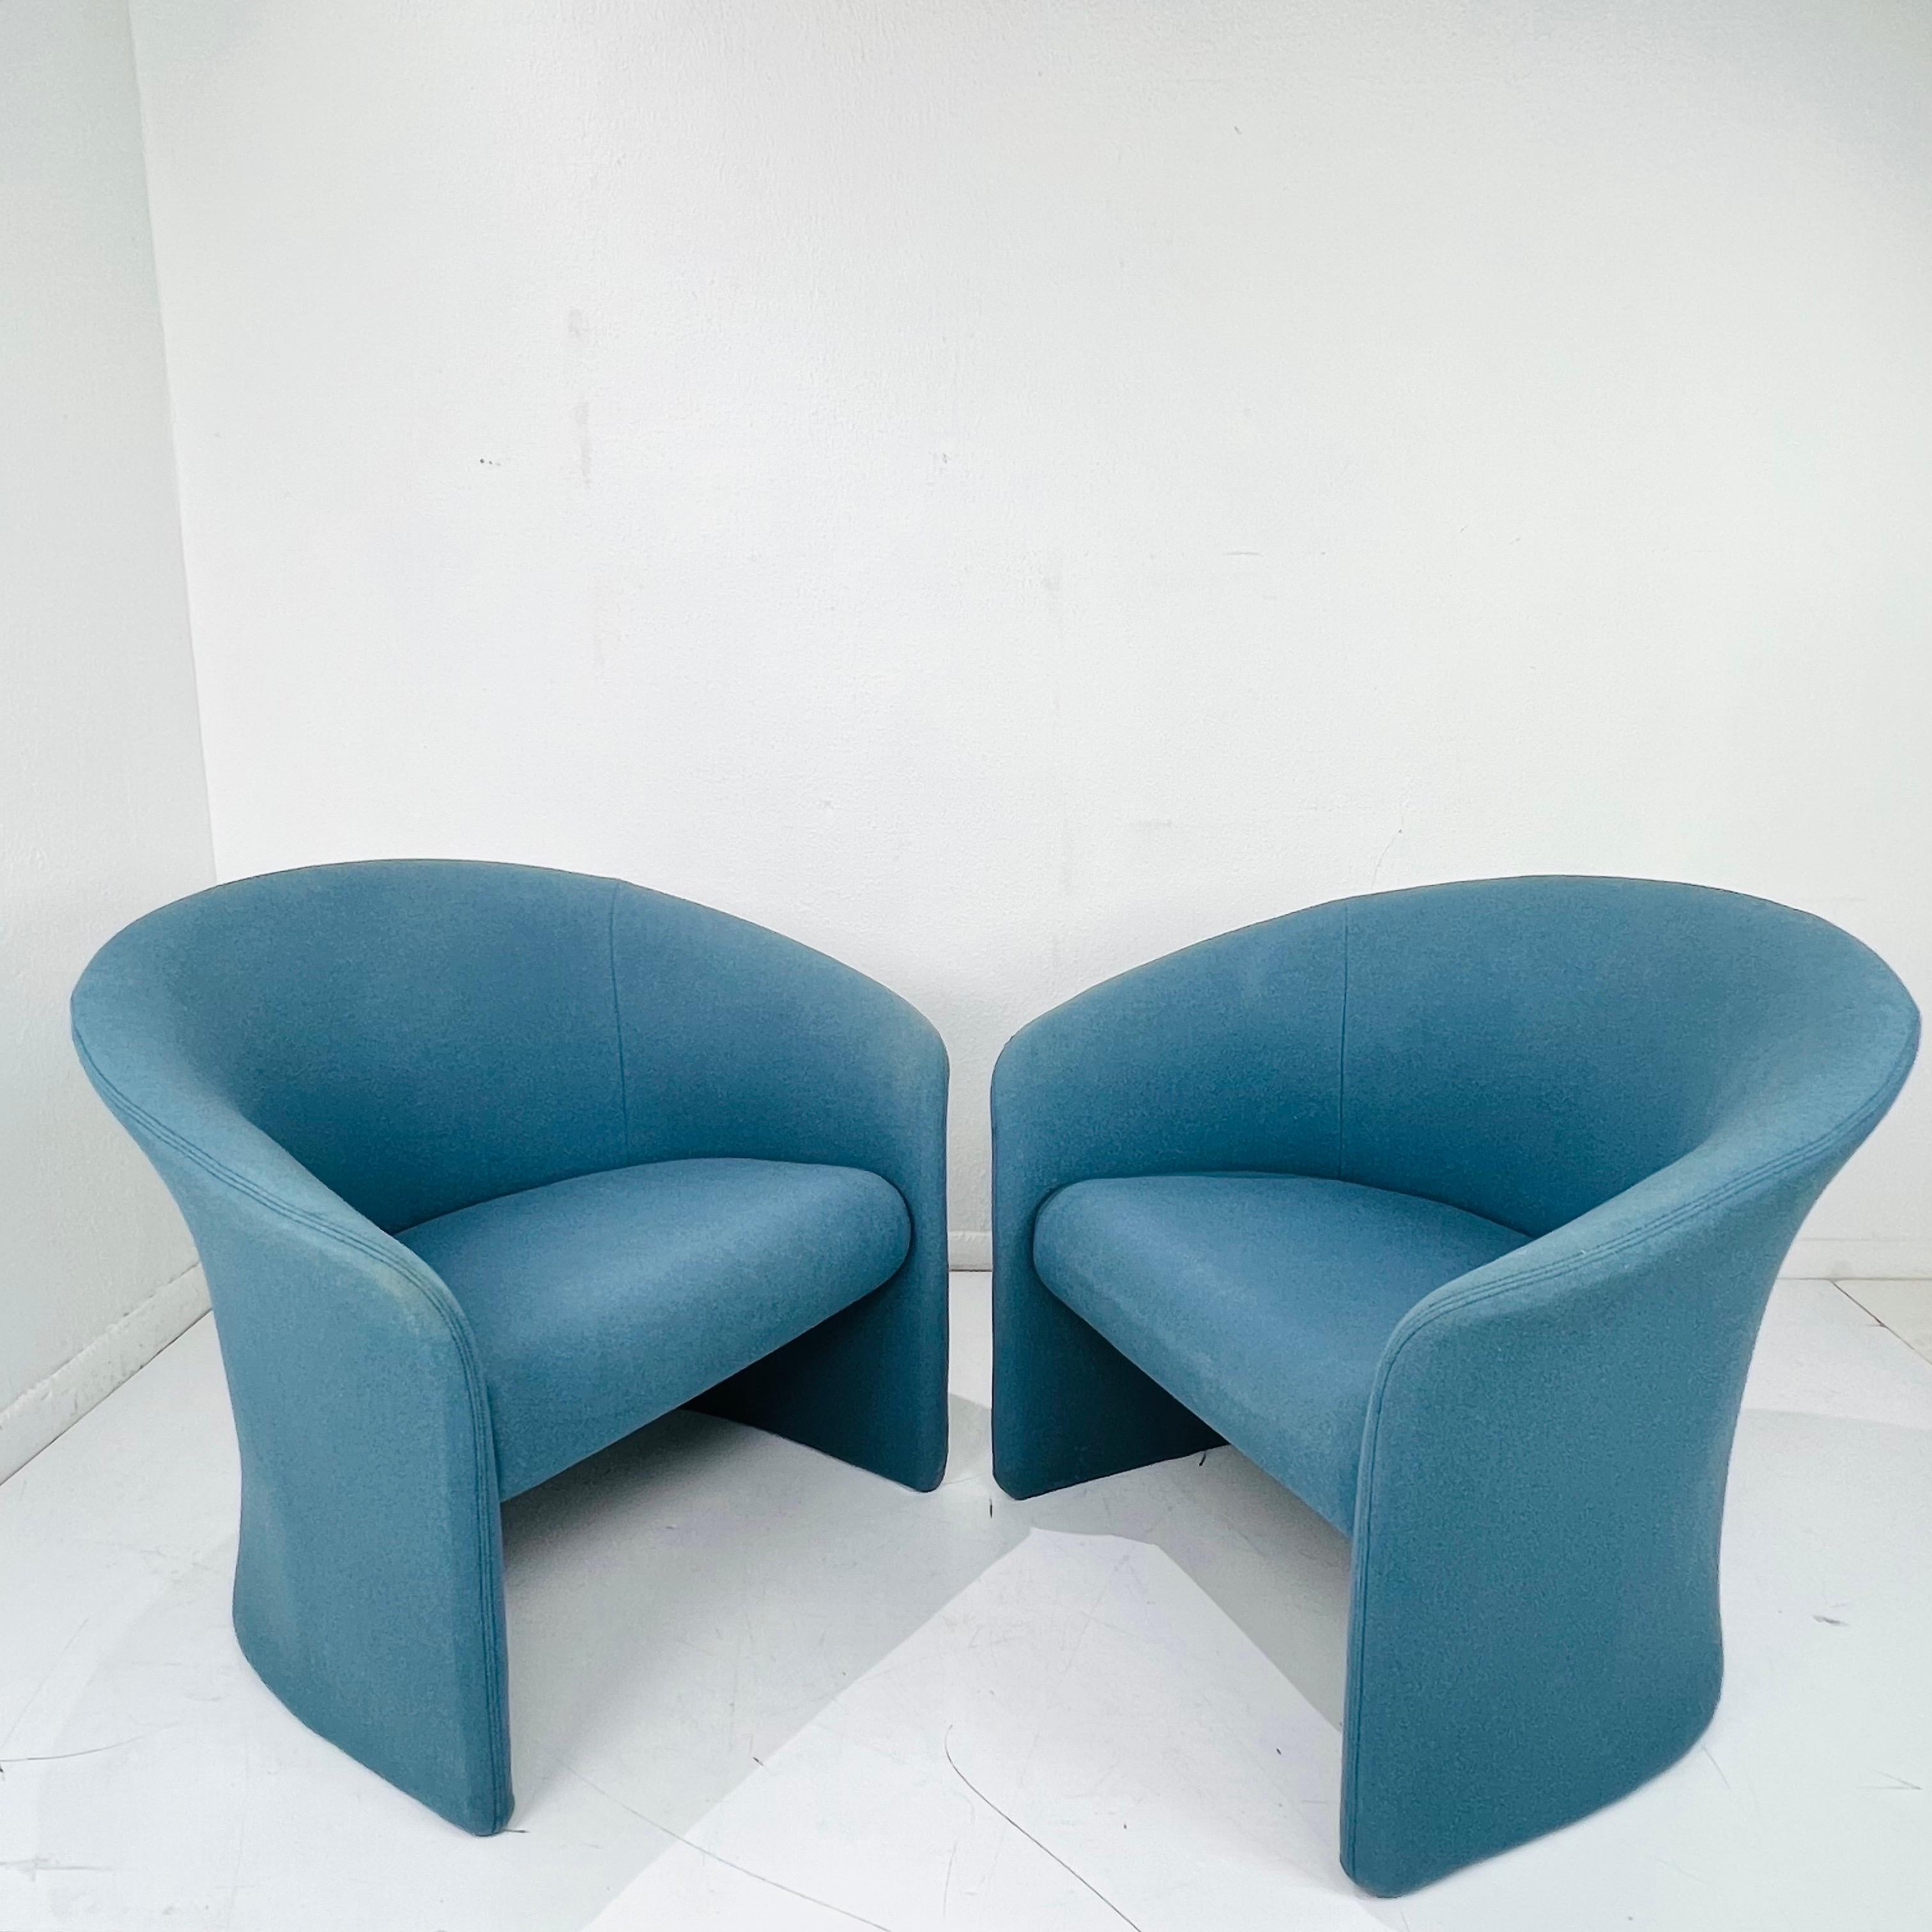 Pair of Postmodern Tub Chairs by Massimo Vignelli In Good Condition For Sale In Dallas, TX